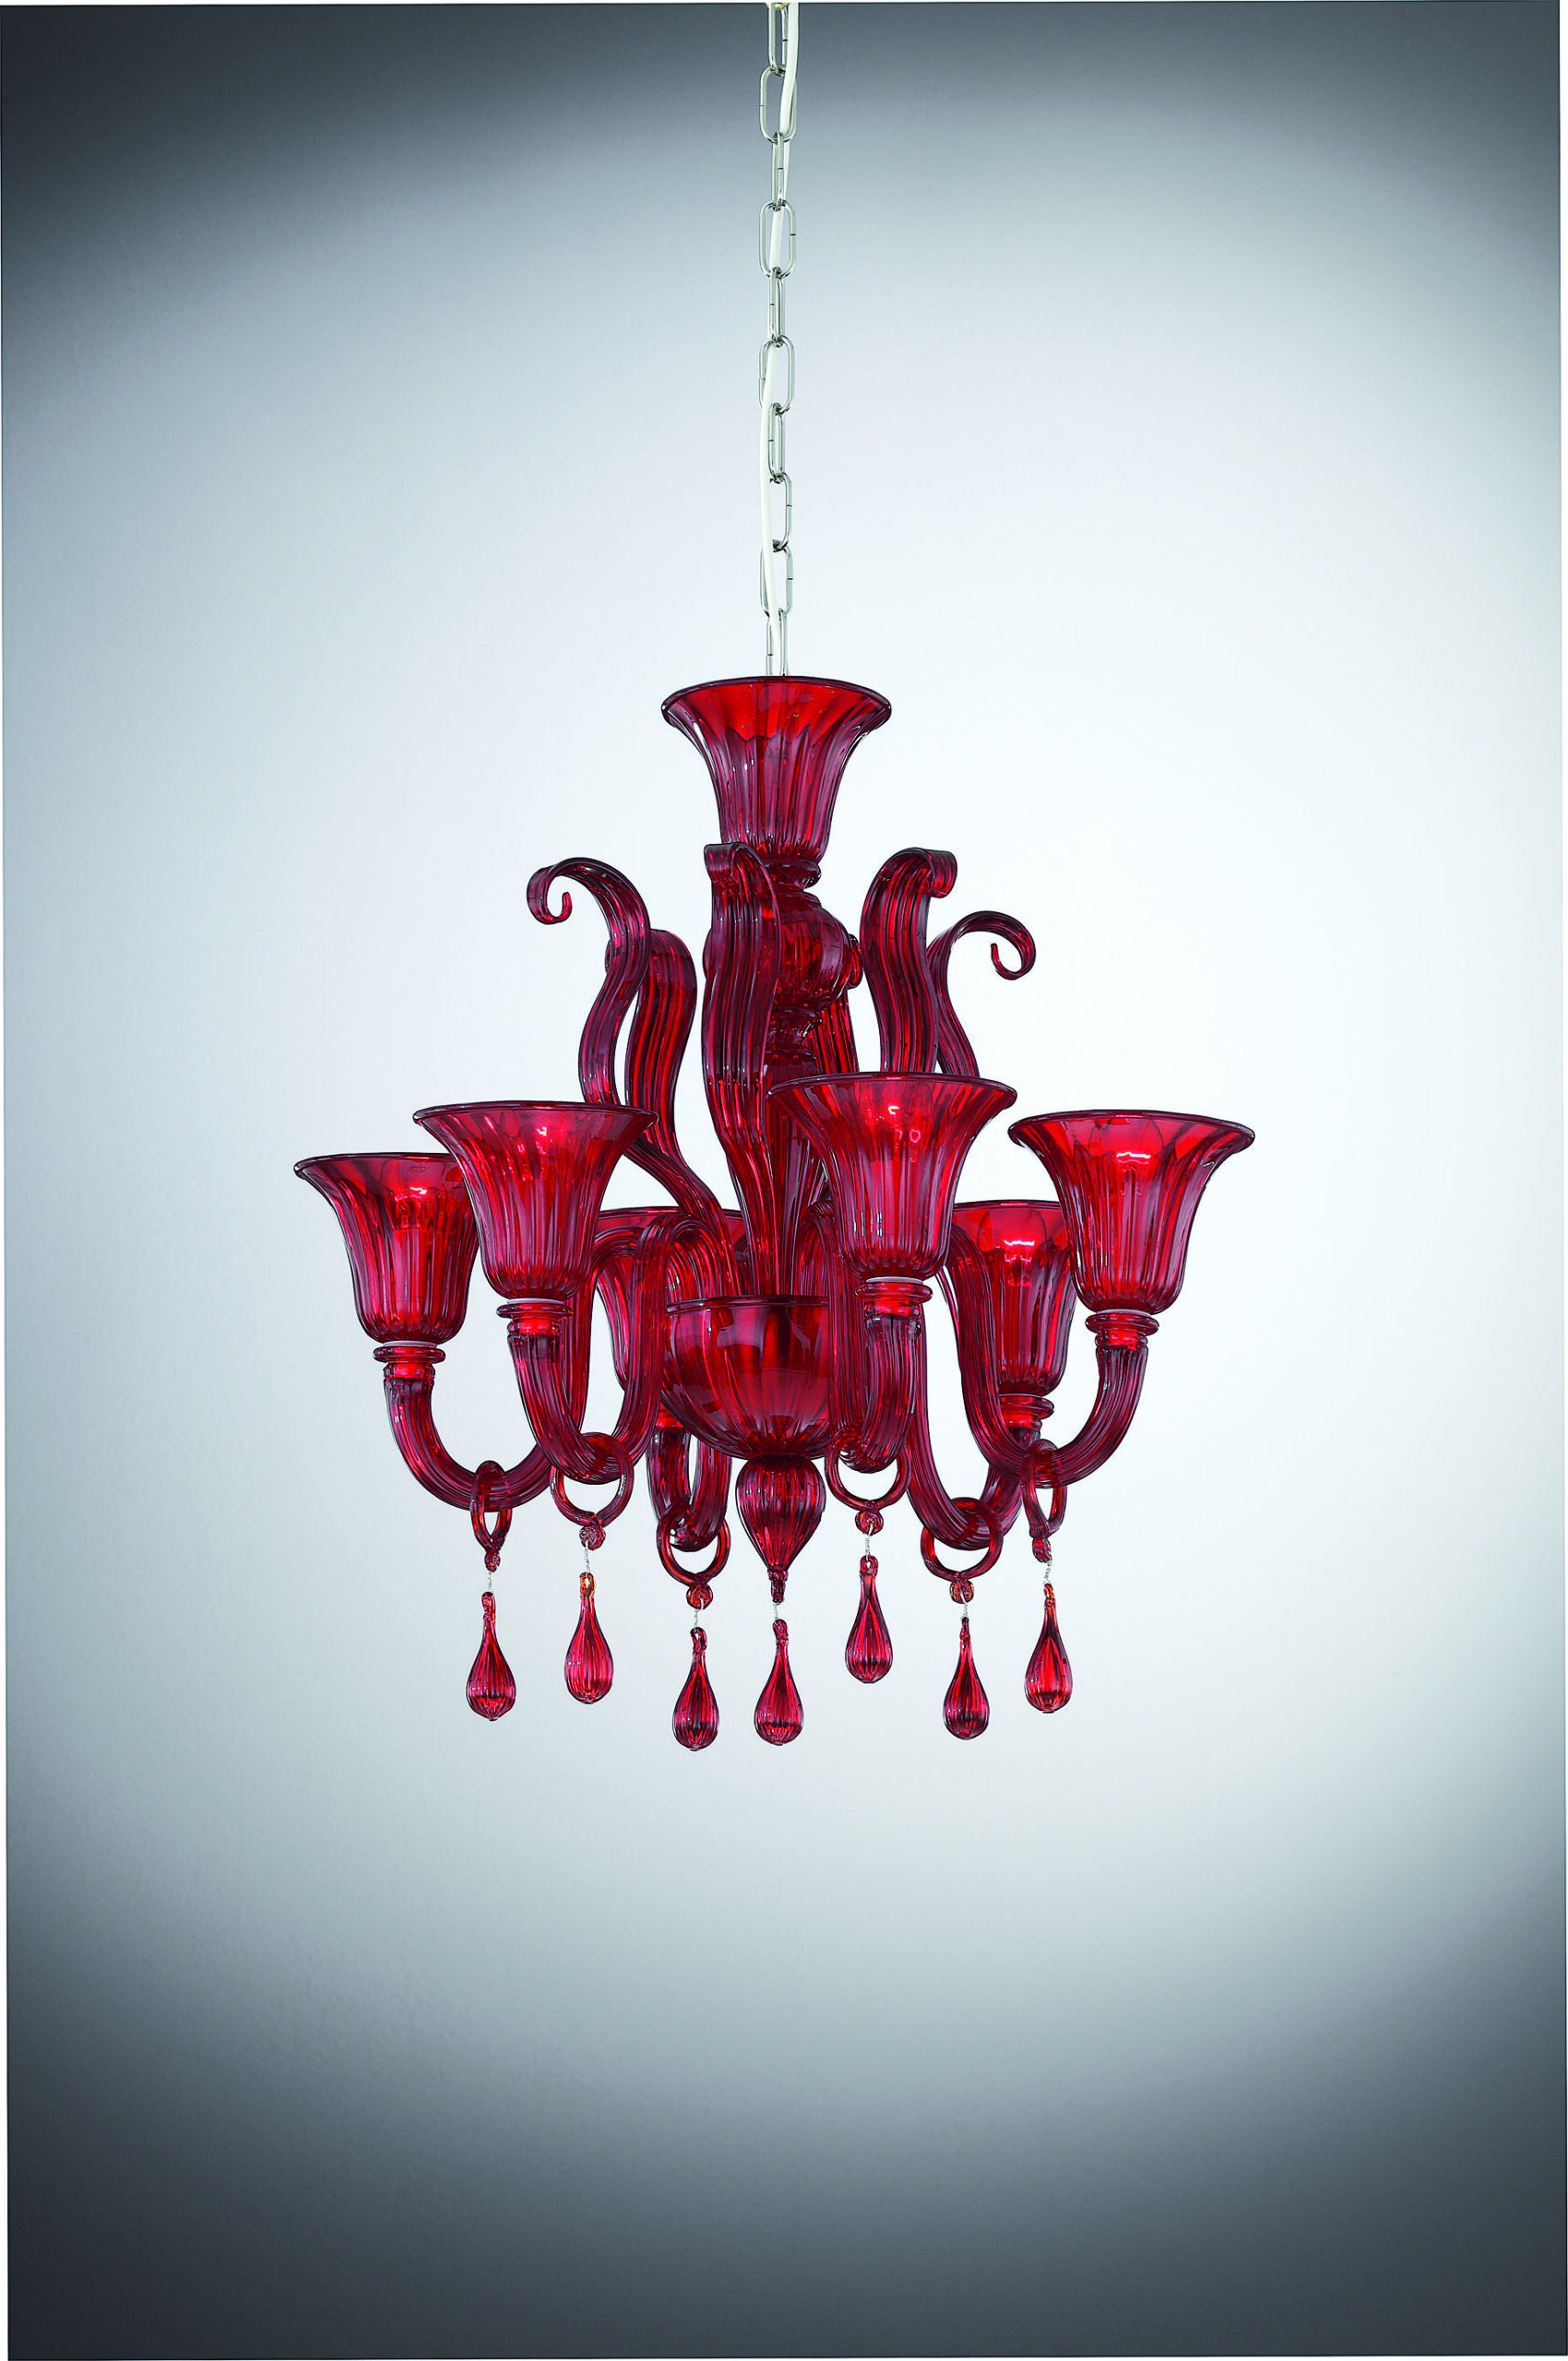 Red Murano Chandelier "Fuoco" With 6 Lights